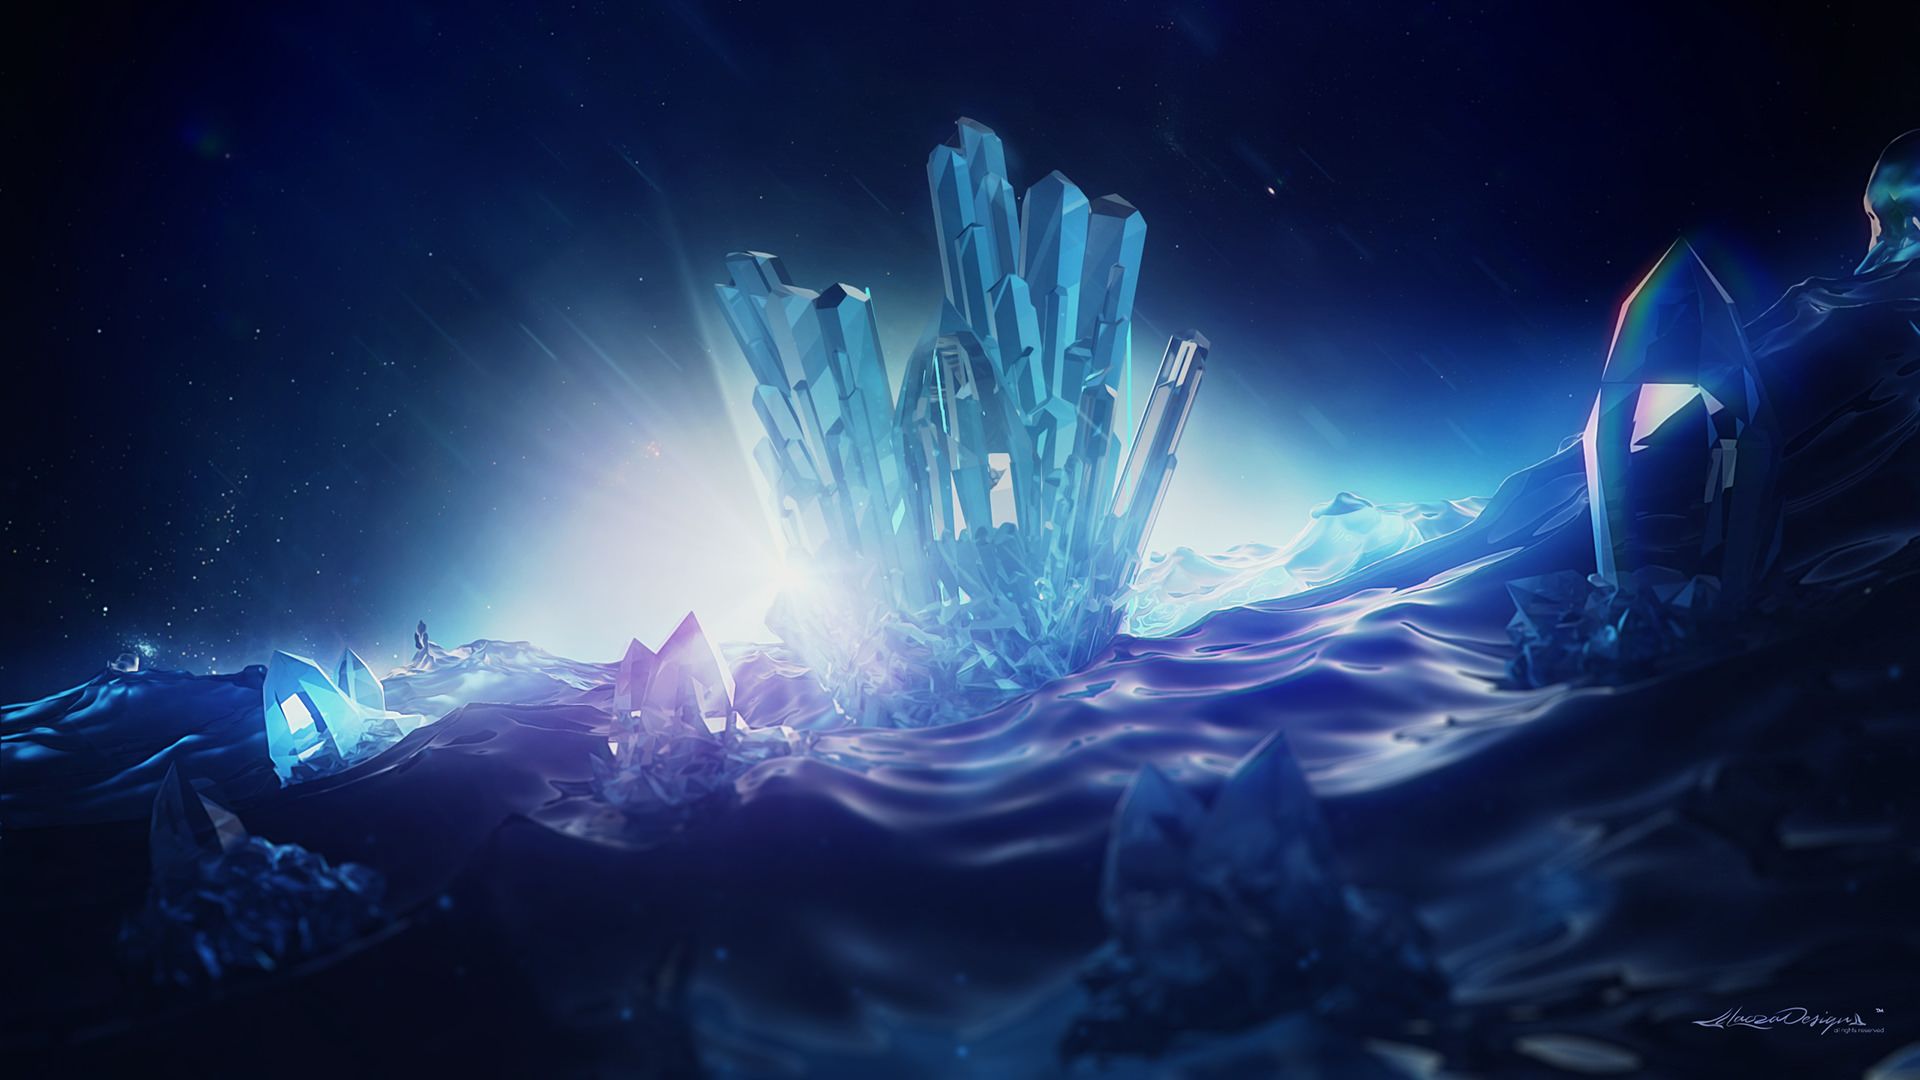 FREE Crystal Wallpaper in PSD